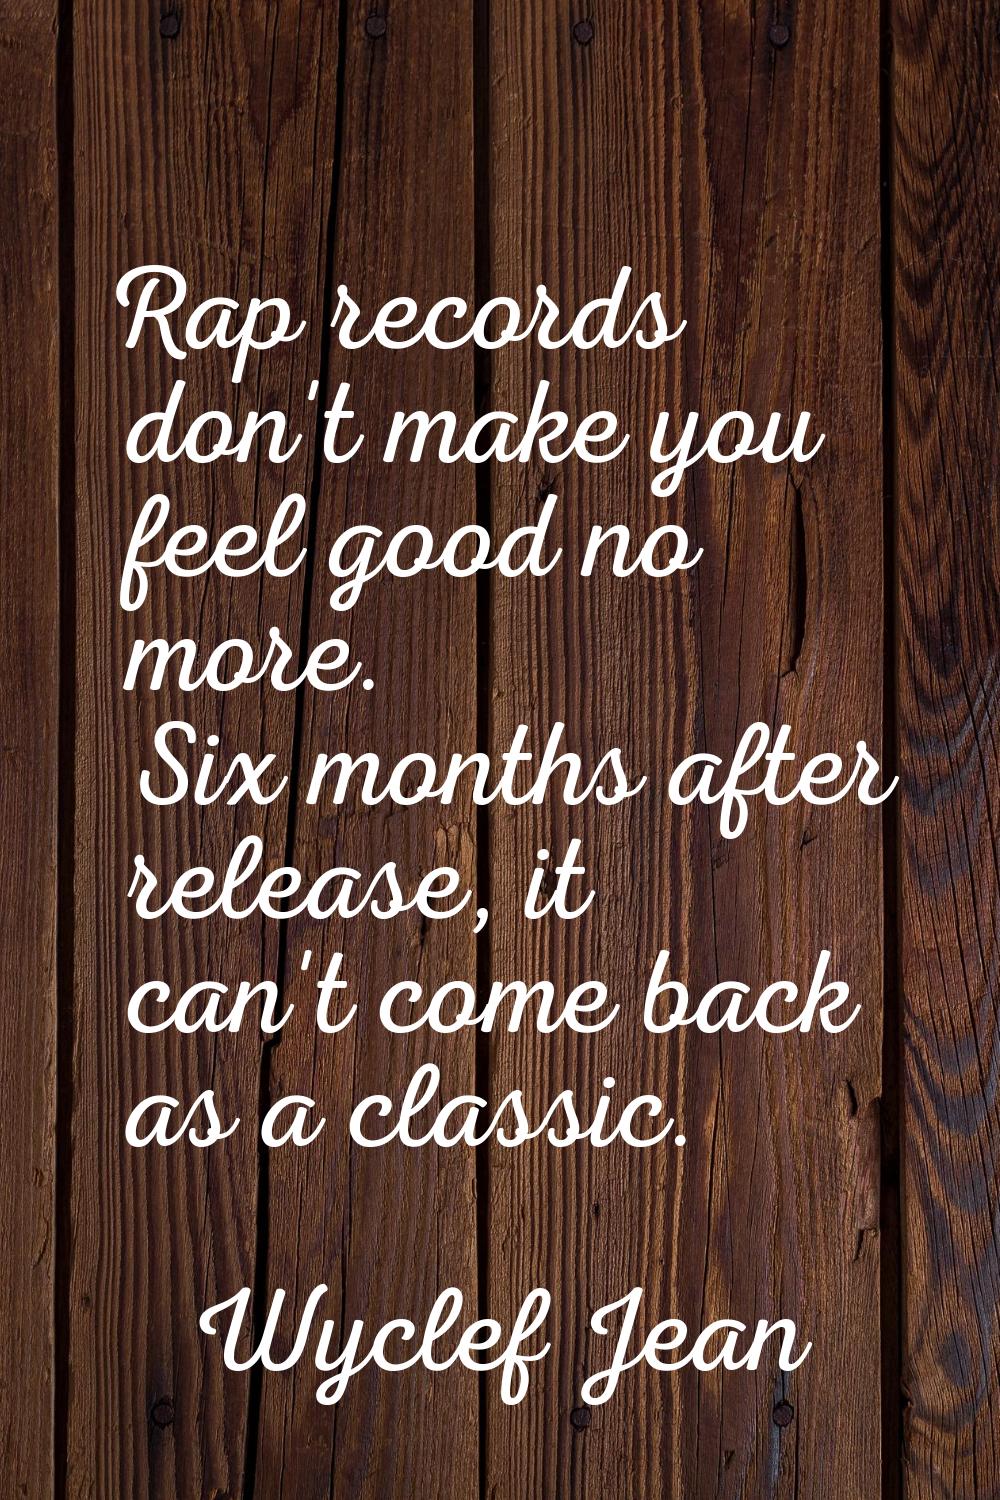 Rap records don't make you feel good no more. Six months after release, it can't come back as a cla